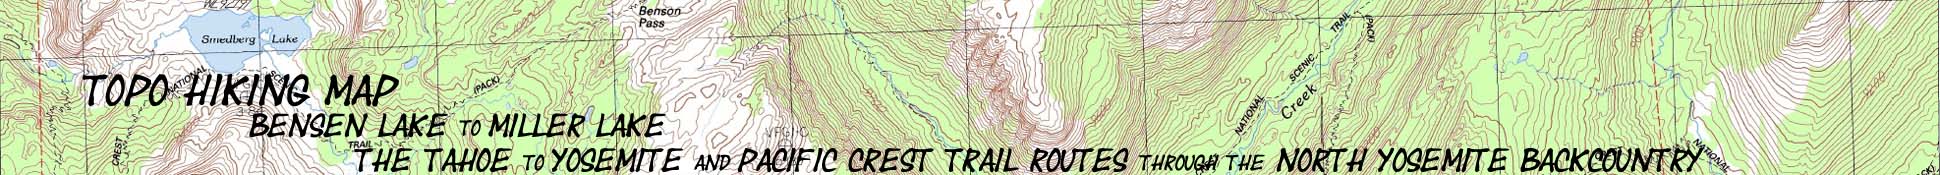 Topo hiking maps of the Pacific Crest and Tahoe to Yosemite Trails through North Yosemite.